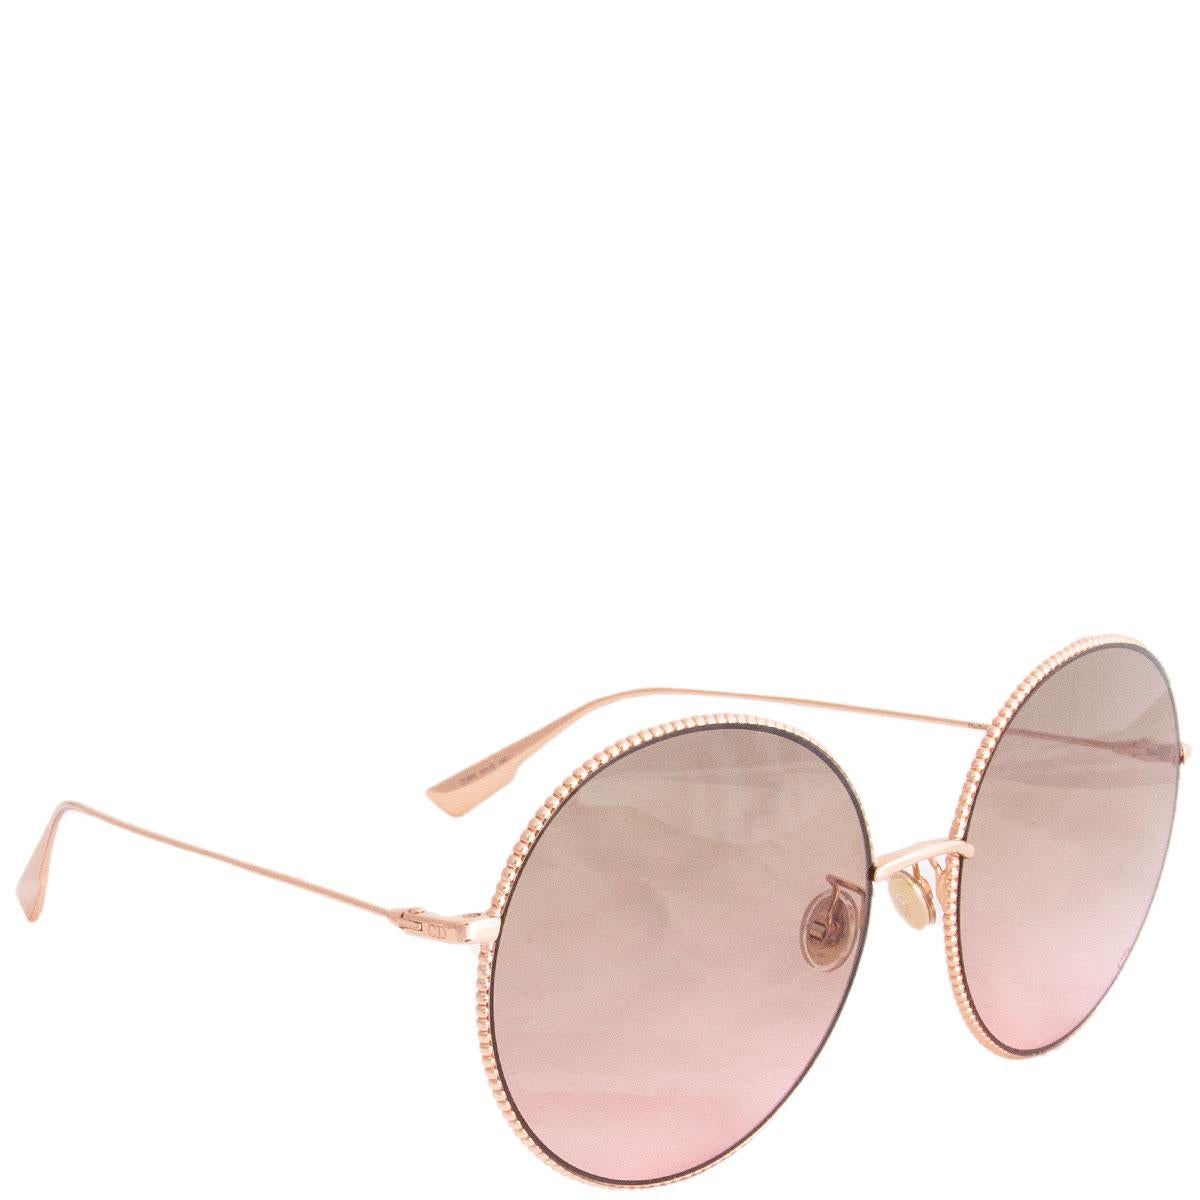 100% authentic Christian Dior 'Society 2F' sunglasses with studded rose gold metal frame and gradient light brown to pink lenses. Have been worn and are in excellent condition. Come with case.

Model	DDB86 60-18 145
Width	14cm (5.5in)
Height	6cm